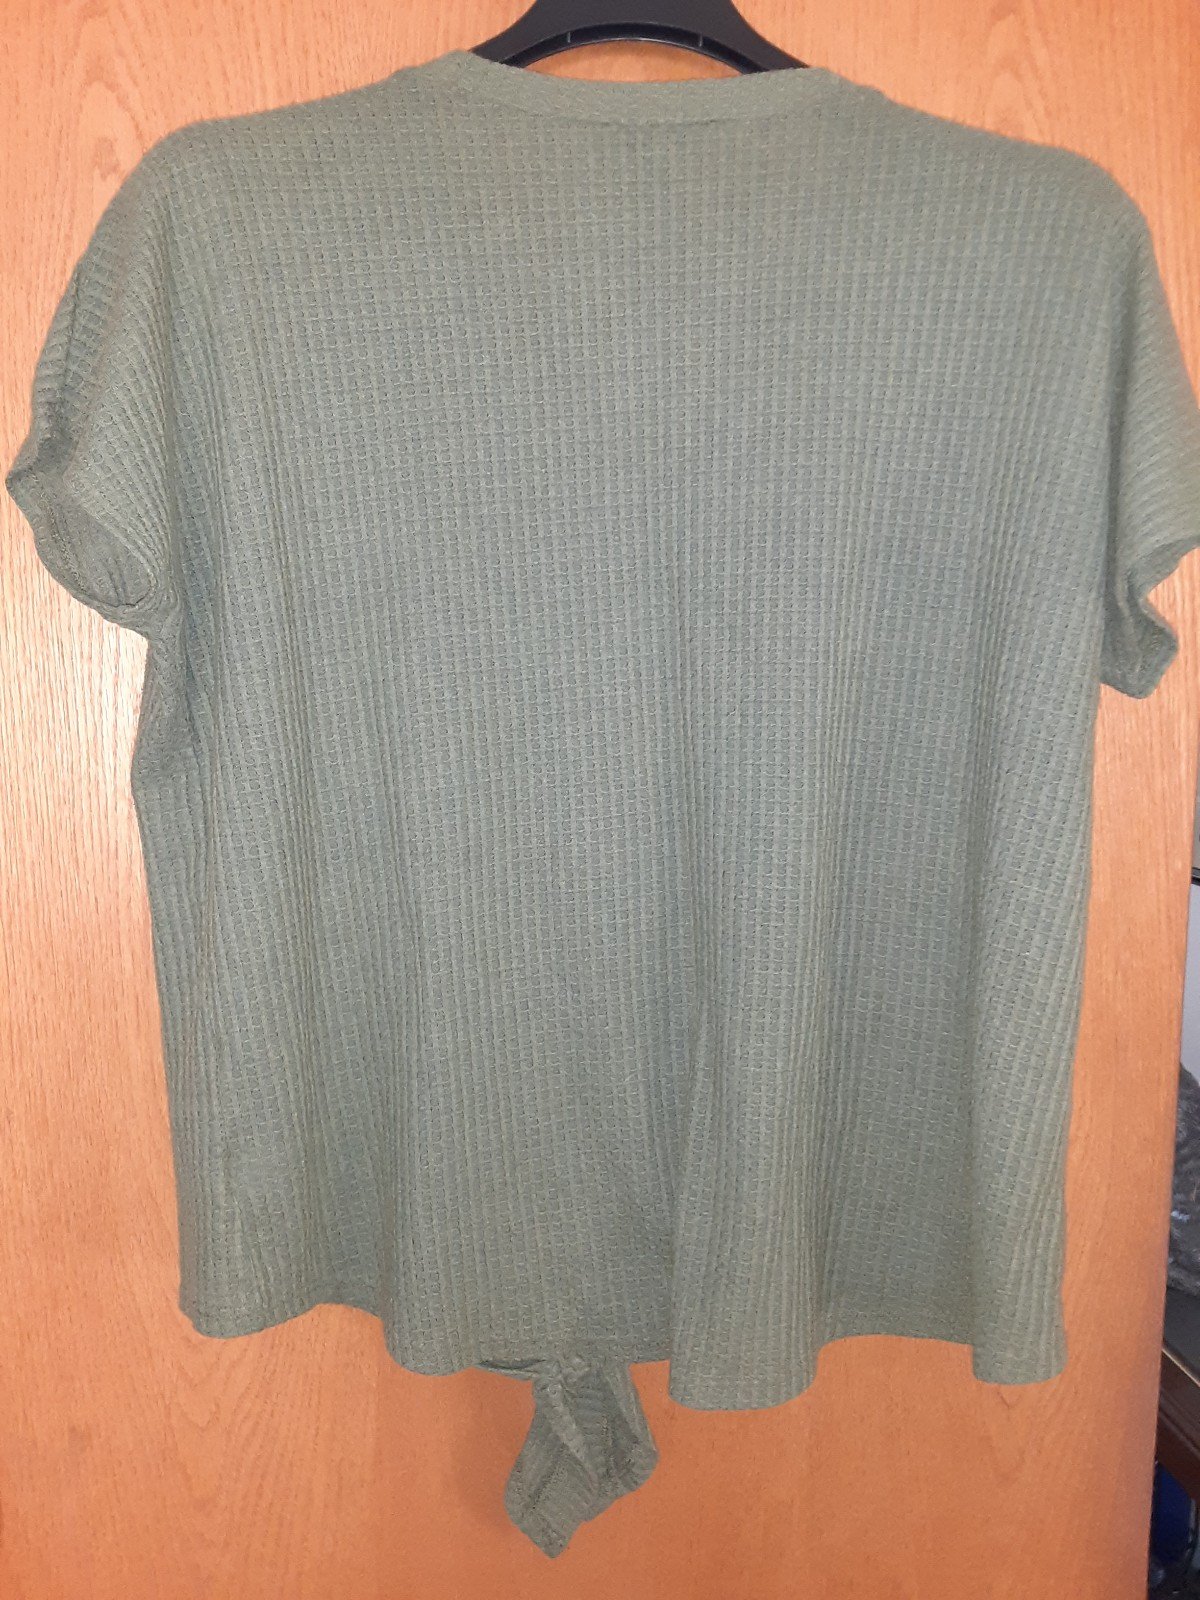 save up to 70% Womens plus size 2X. Torrid green knit top Fjg33PFue Cool